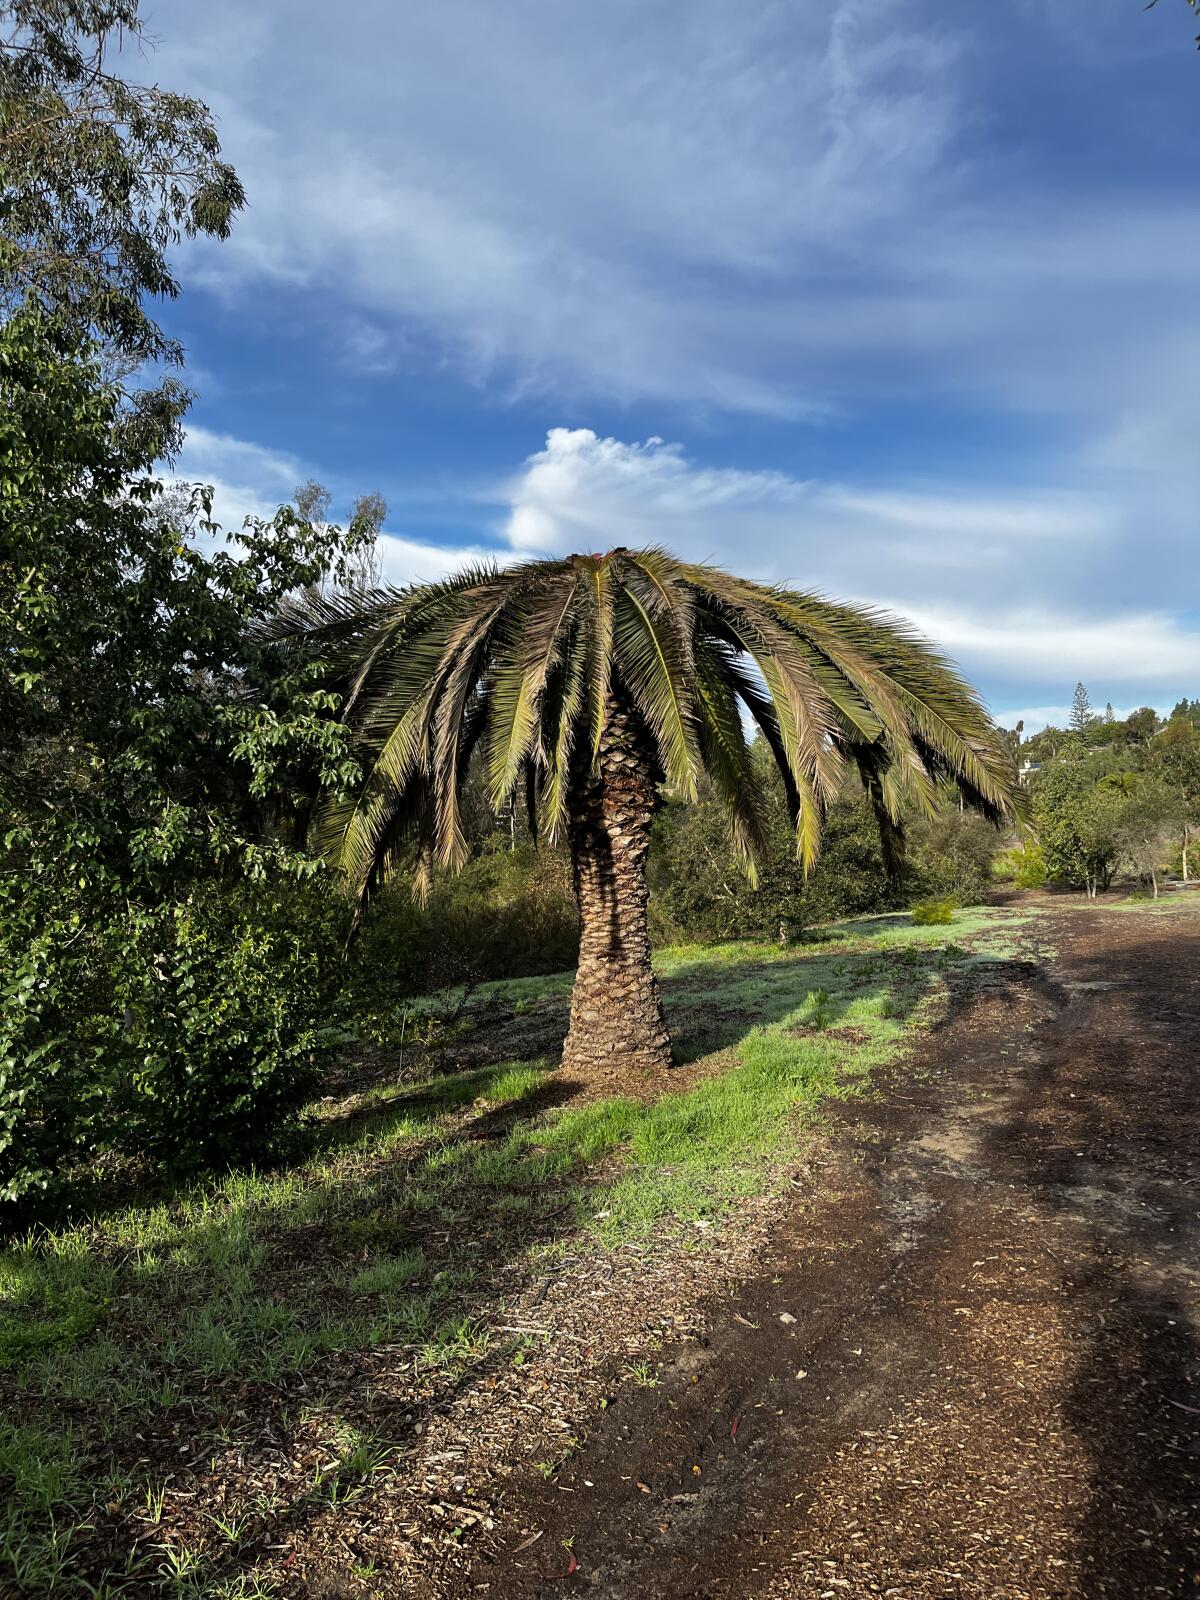 A palm weevil-infested tree in Rancho Santa Fe.